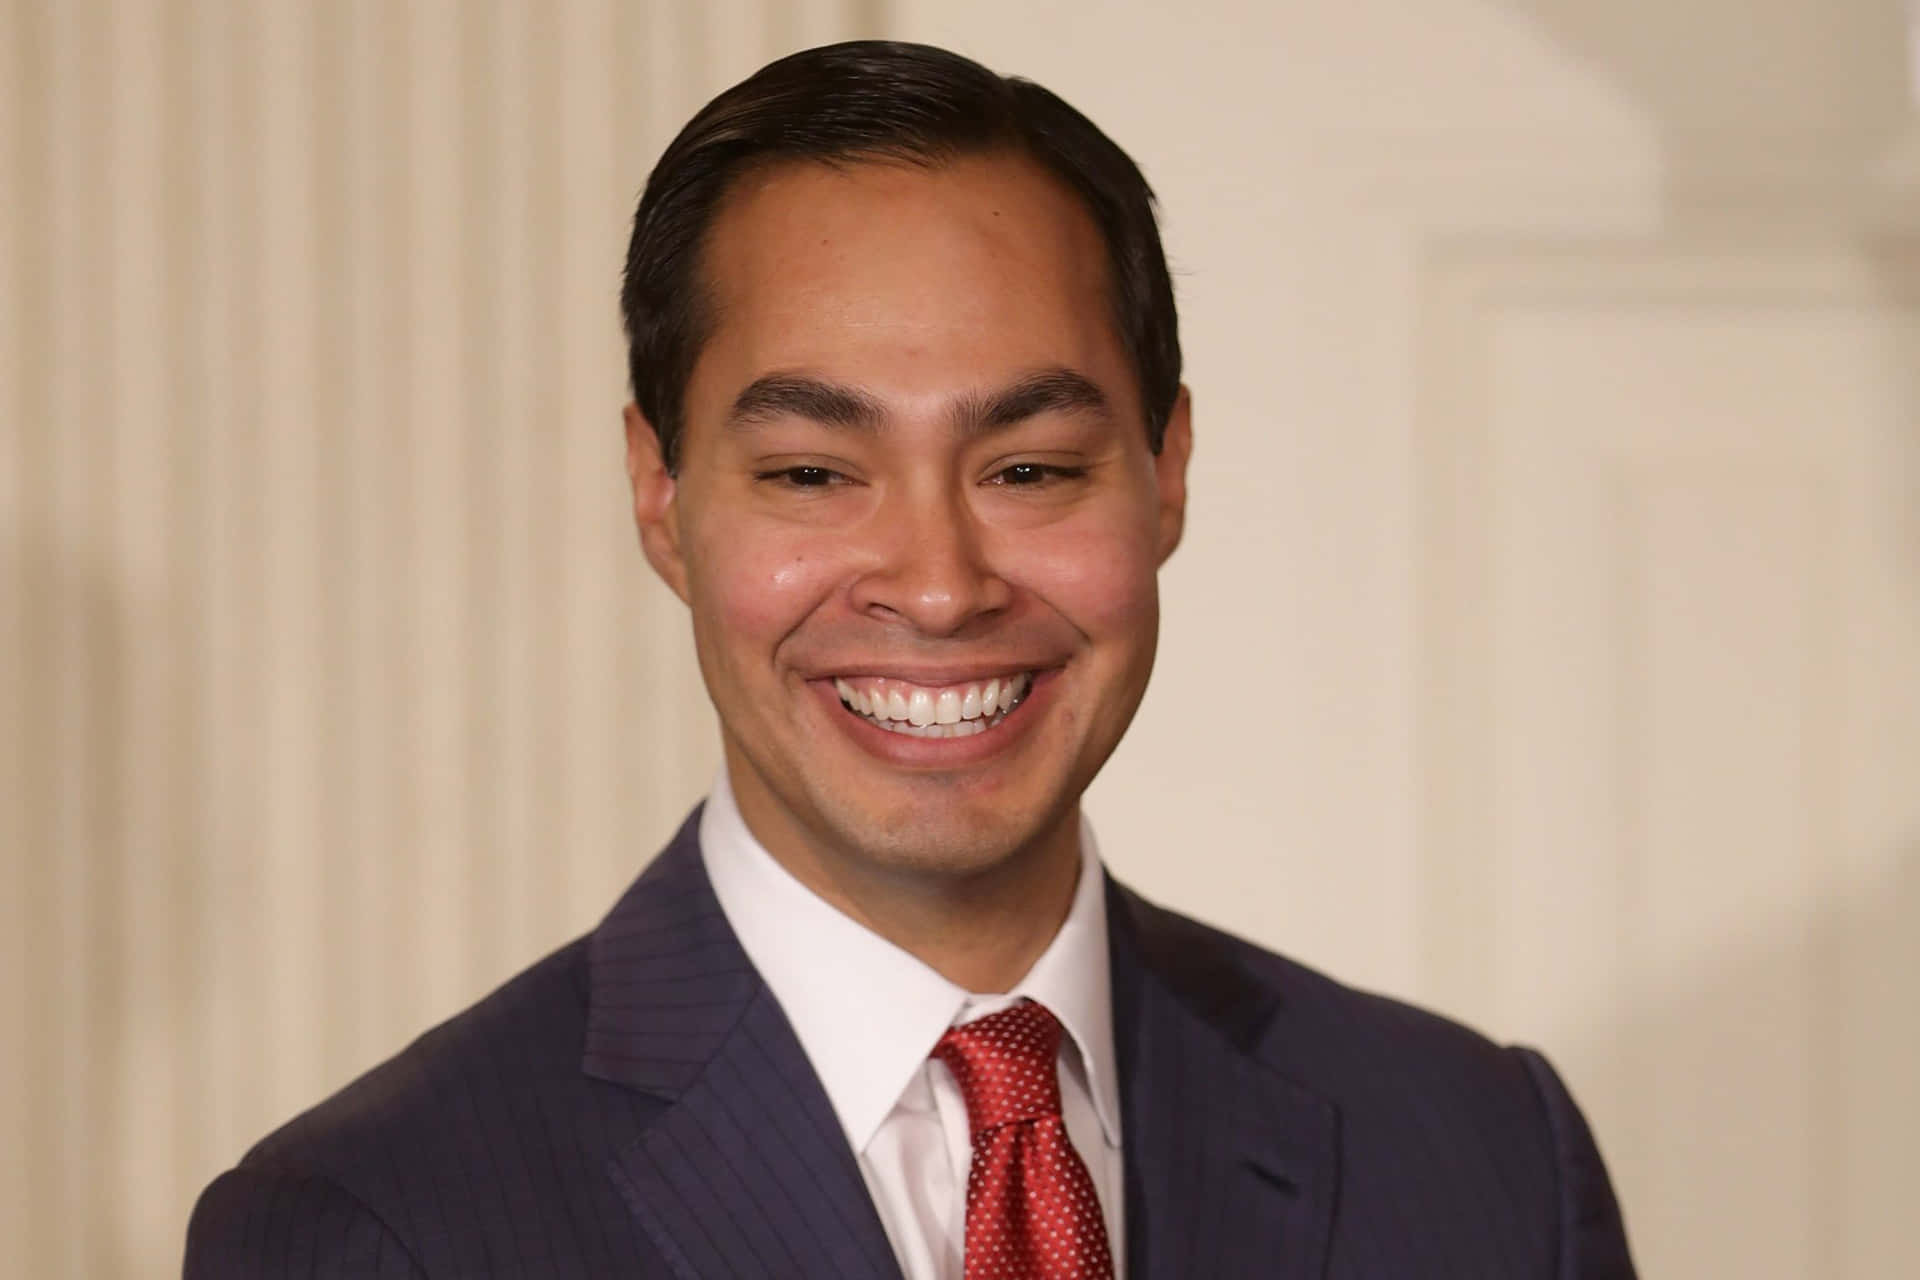 Julian Castro flashes an engaging smile in a front view portrait. Wallpaper